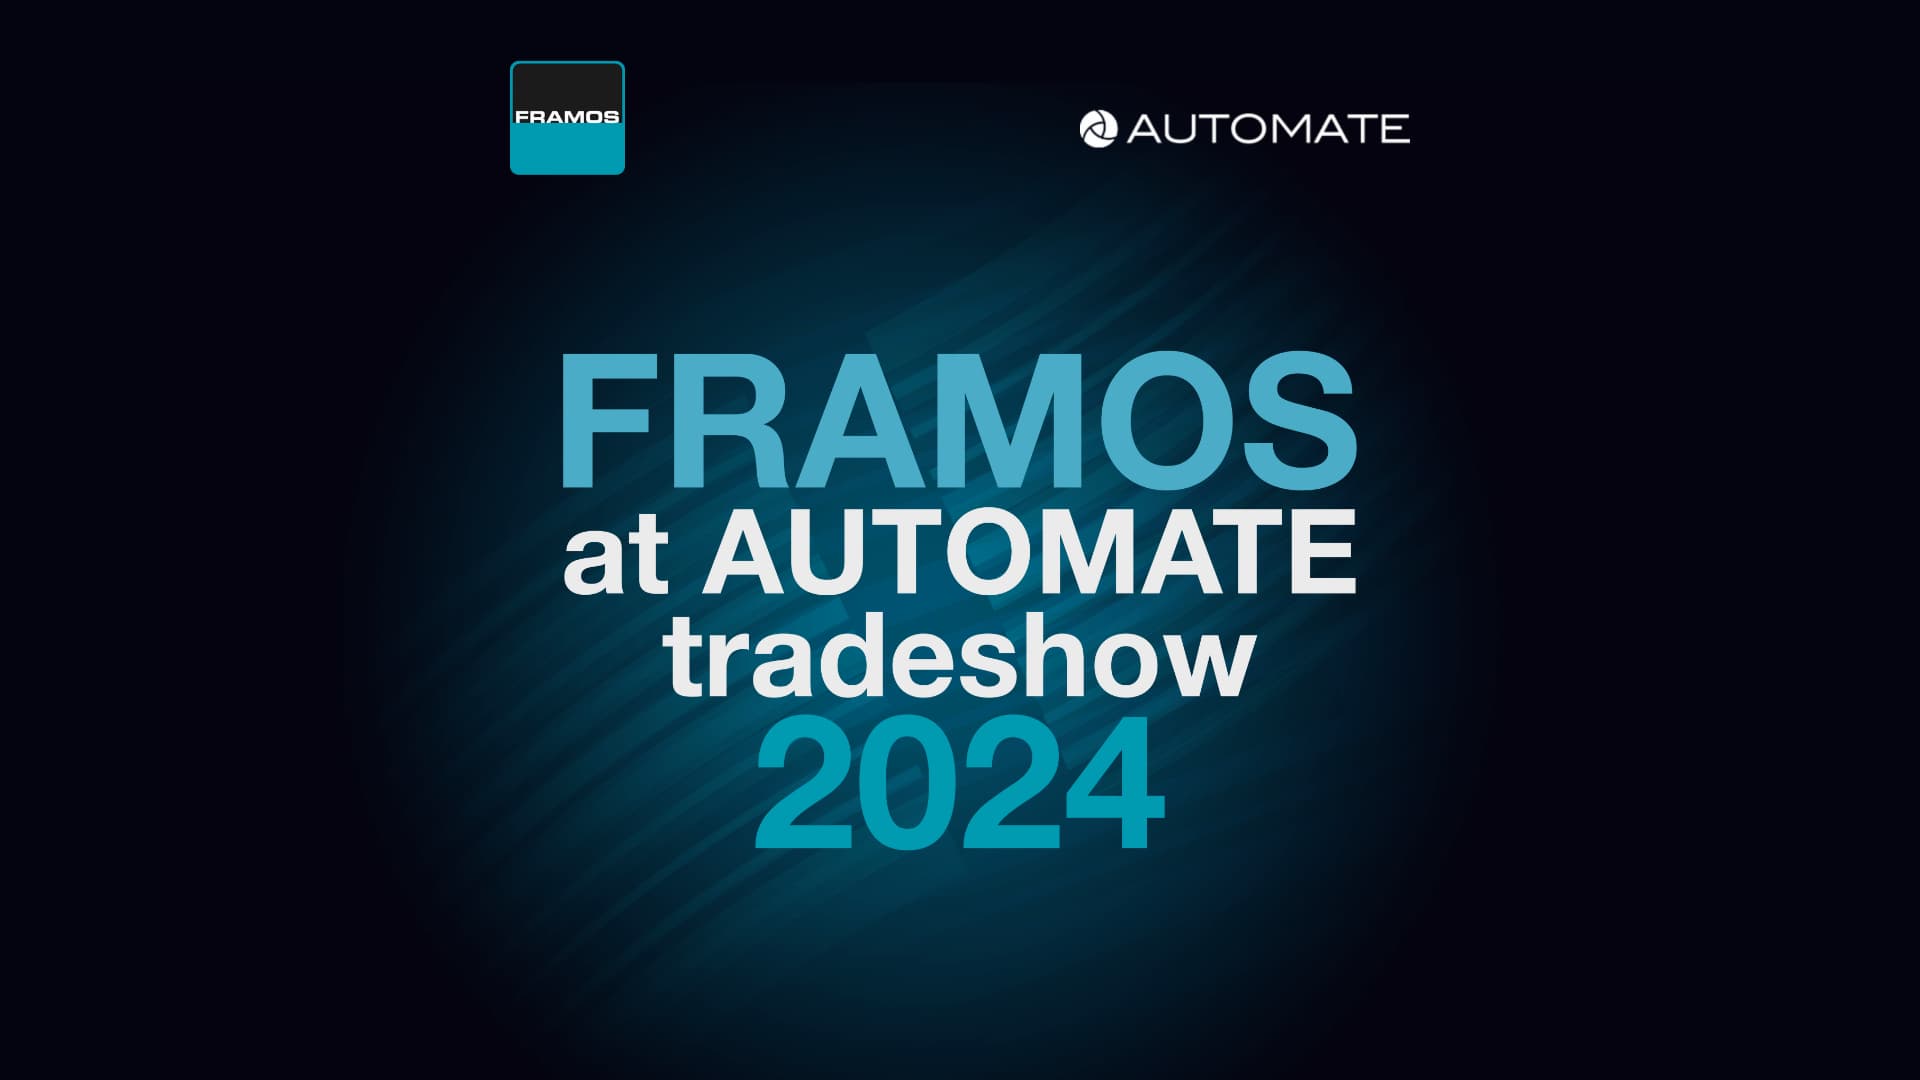 FRAMOS to showcase automation solutions at the largest robotics and automation show in North America 